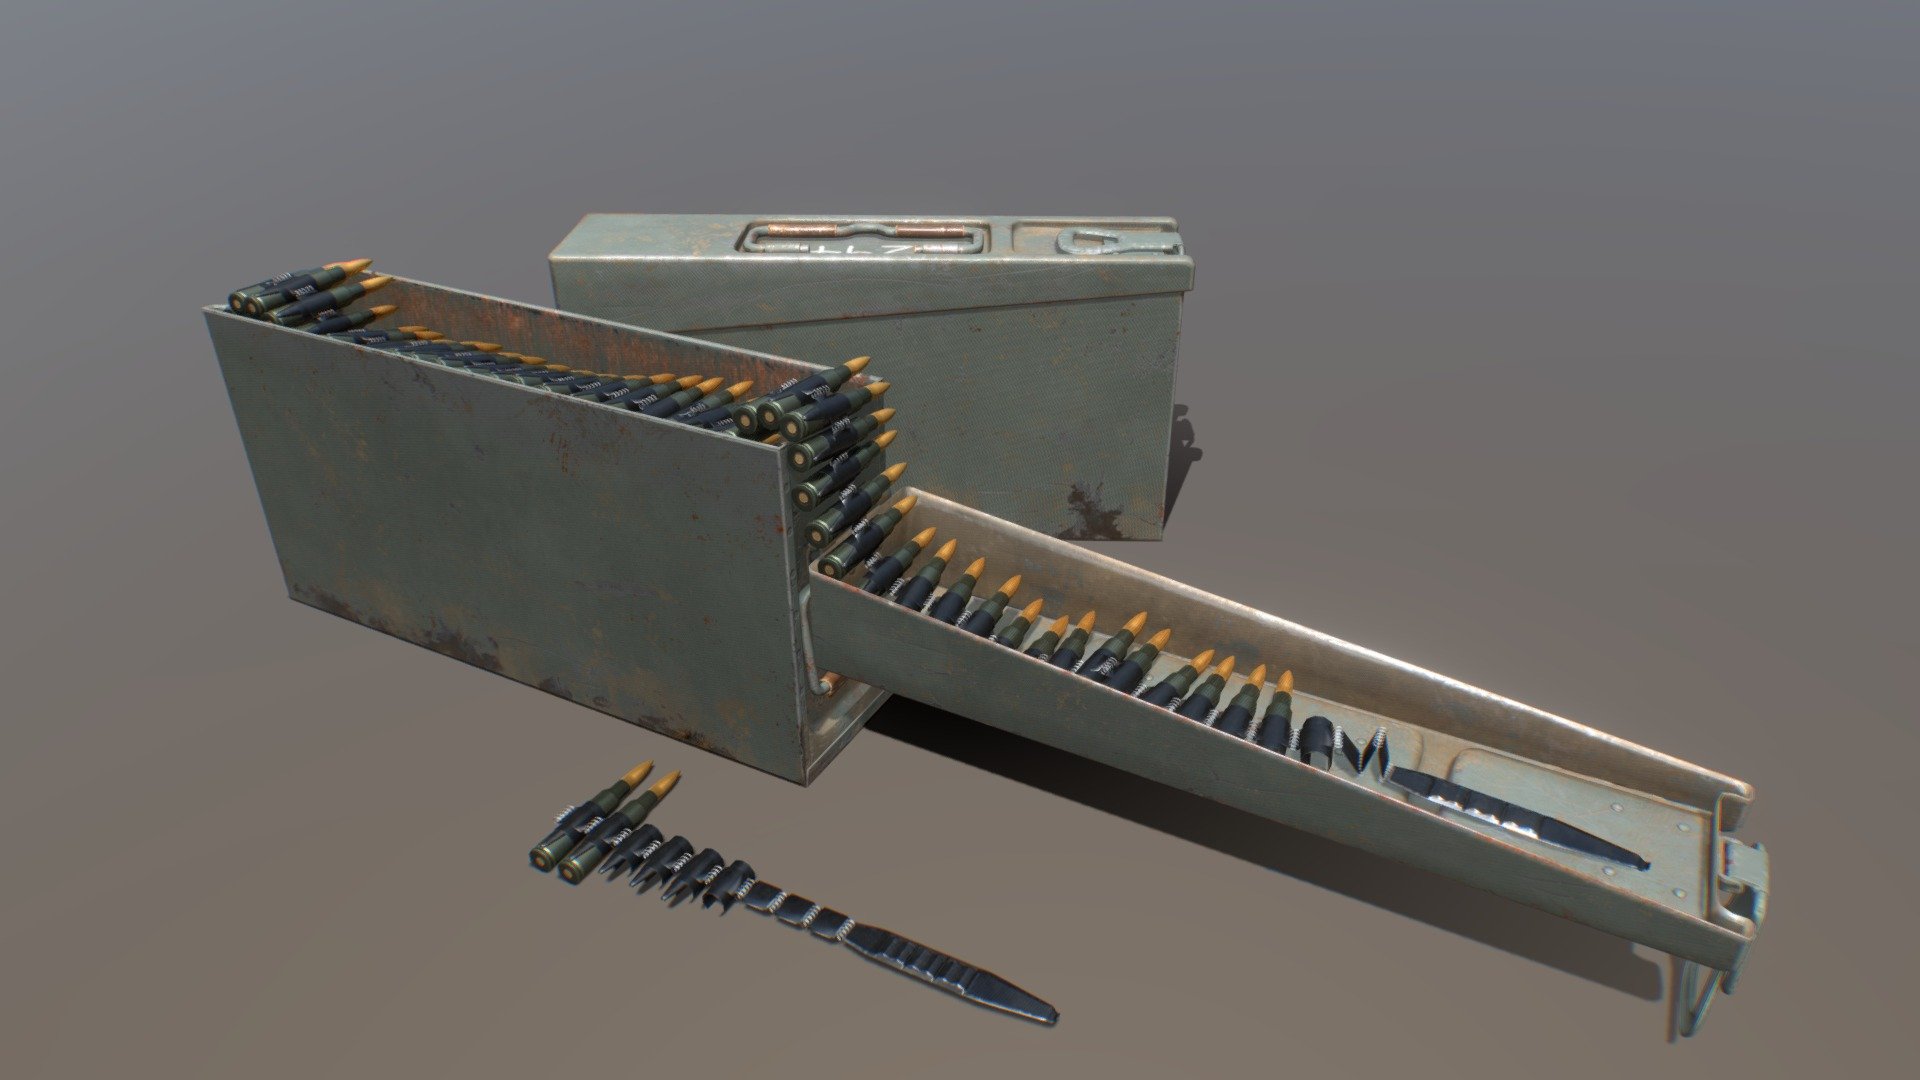 German Ammunition Can designed to accompany the German MG34 and the MG42 machine guns. The container could hold up to 300 rounds of Mauser 8x57 bullets. An interesting and unique feature about the design of this container is the offset handle that allowed a solider to carry two containers in one hand.

This was modelled in Blender and textured in Substance painter. This was created for demonstration and upskilling purposes, If you would like to use this for anything please contact me 3d model